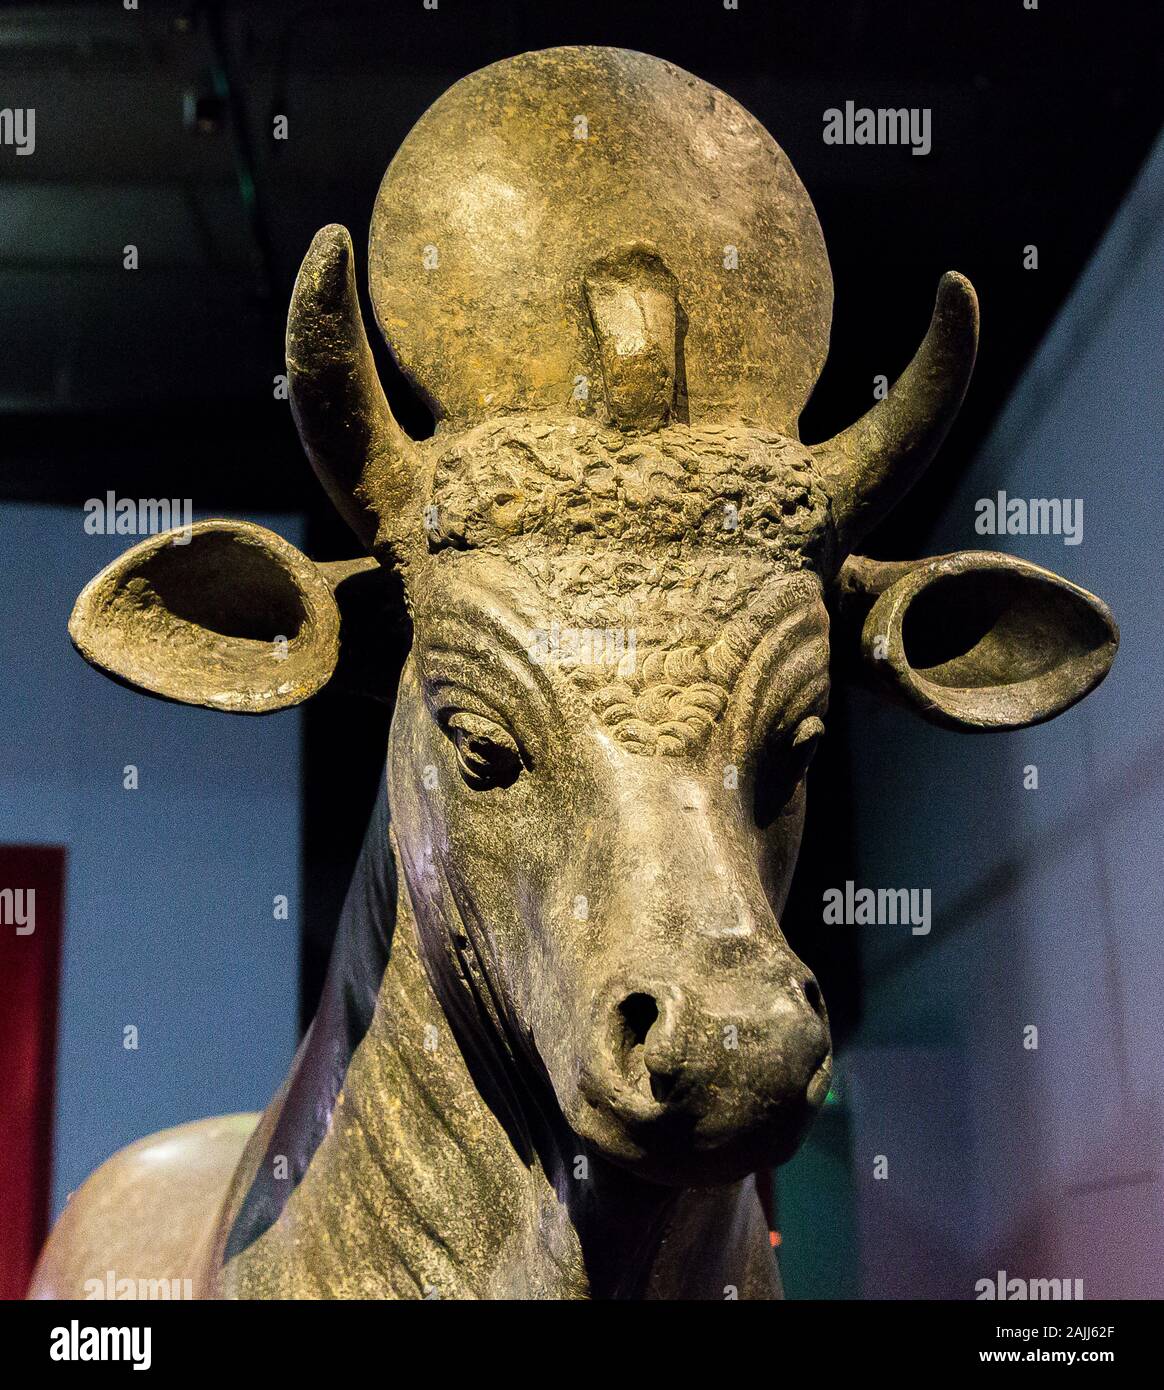 Photo taken during the opening visit of the exhibition “Osiris, Egypt's Sunken Mysteries”. Statue of the Apis bull. Stock Photo